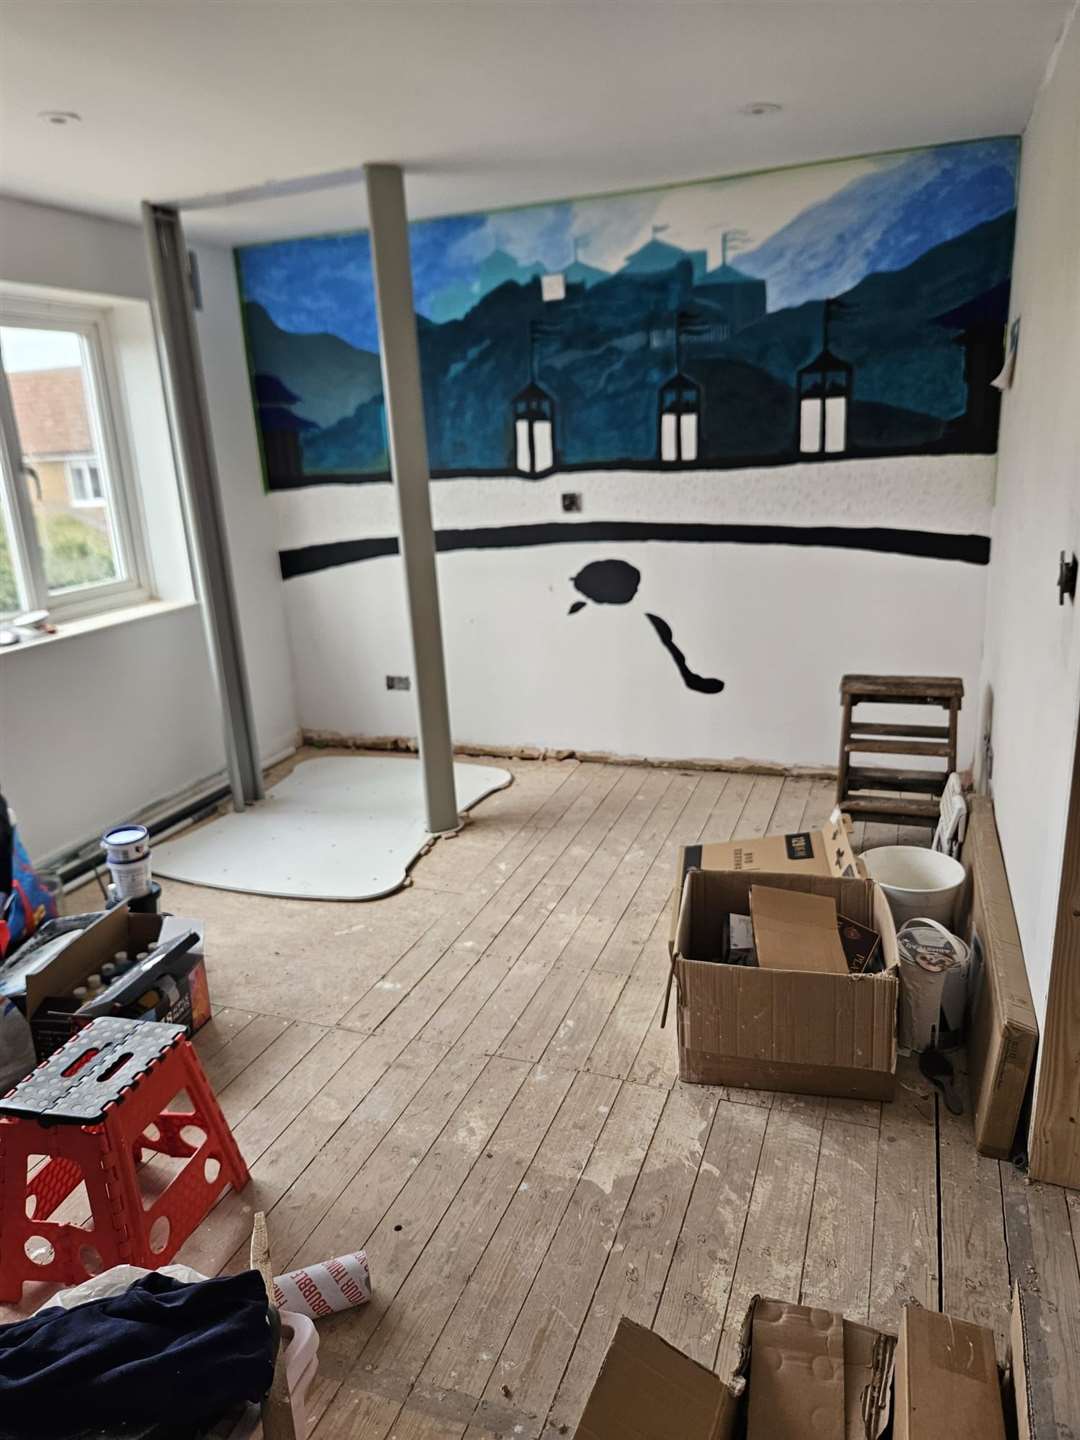 A family friend has been helping to create a Harry Potter mural for Caitlin’s room (Nick Passey/PA)